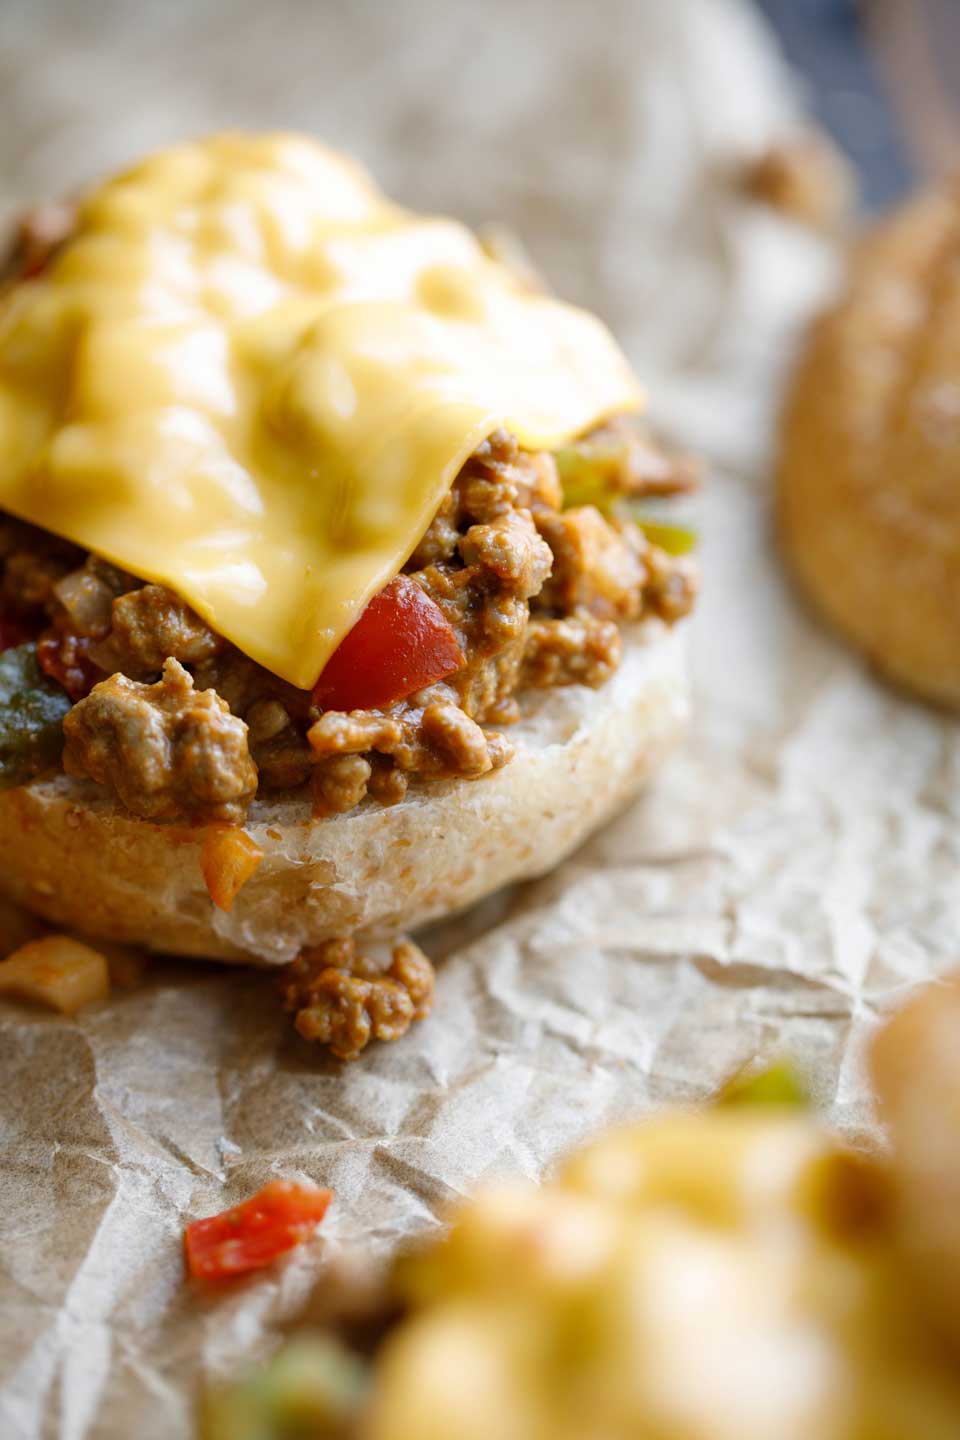 Melty American cheese is the quintessential way to finish off this Cheeseburger Sloppy Joe recipe!